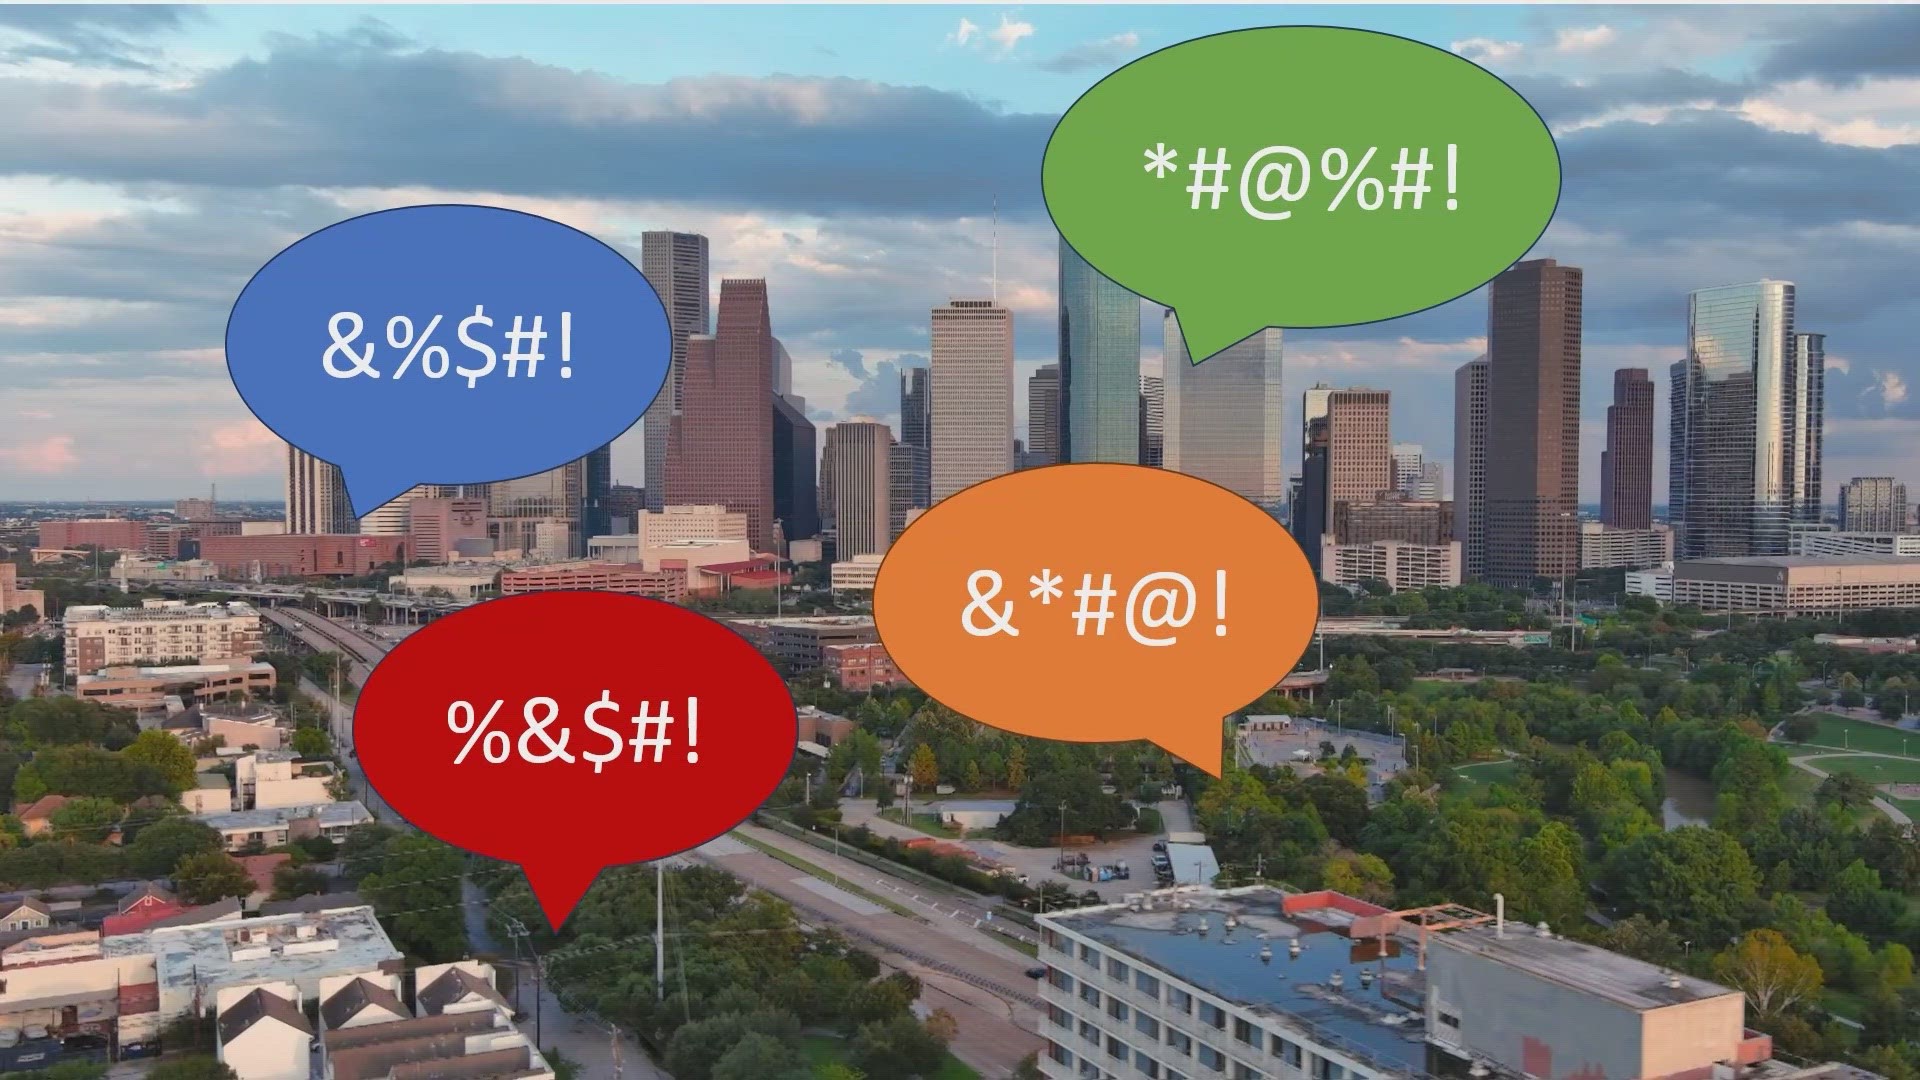 Everything is bigger in Texas, including the potty mouths, according to a recent study. It says Texans curse on social media more than folks in other states.